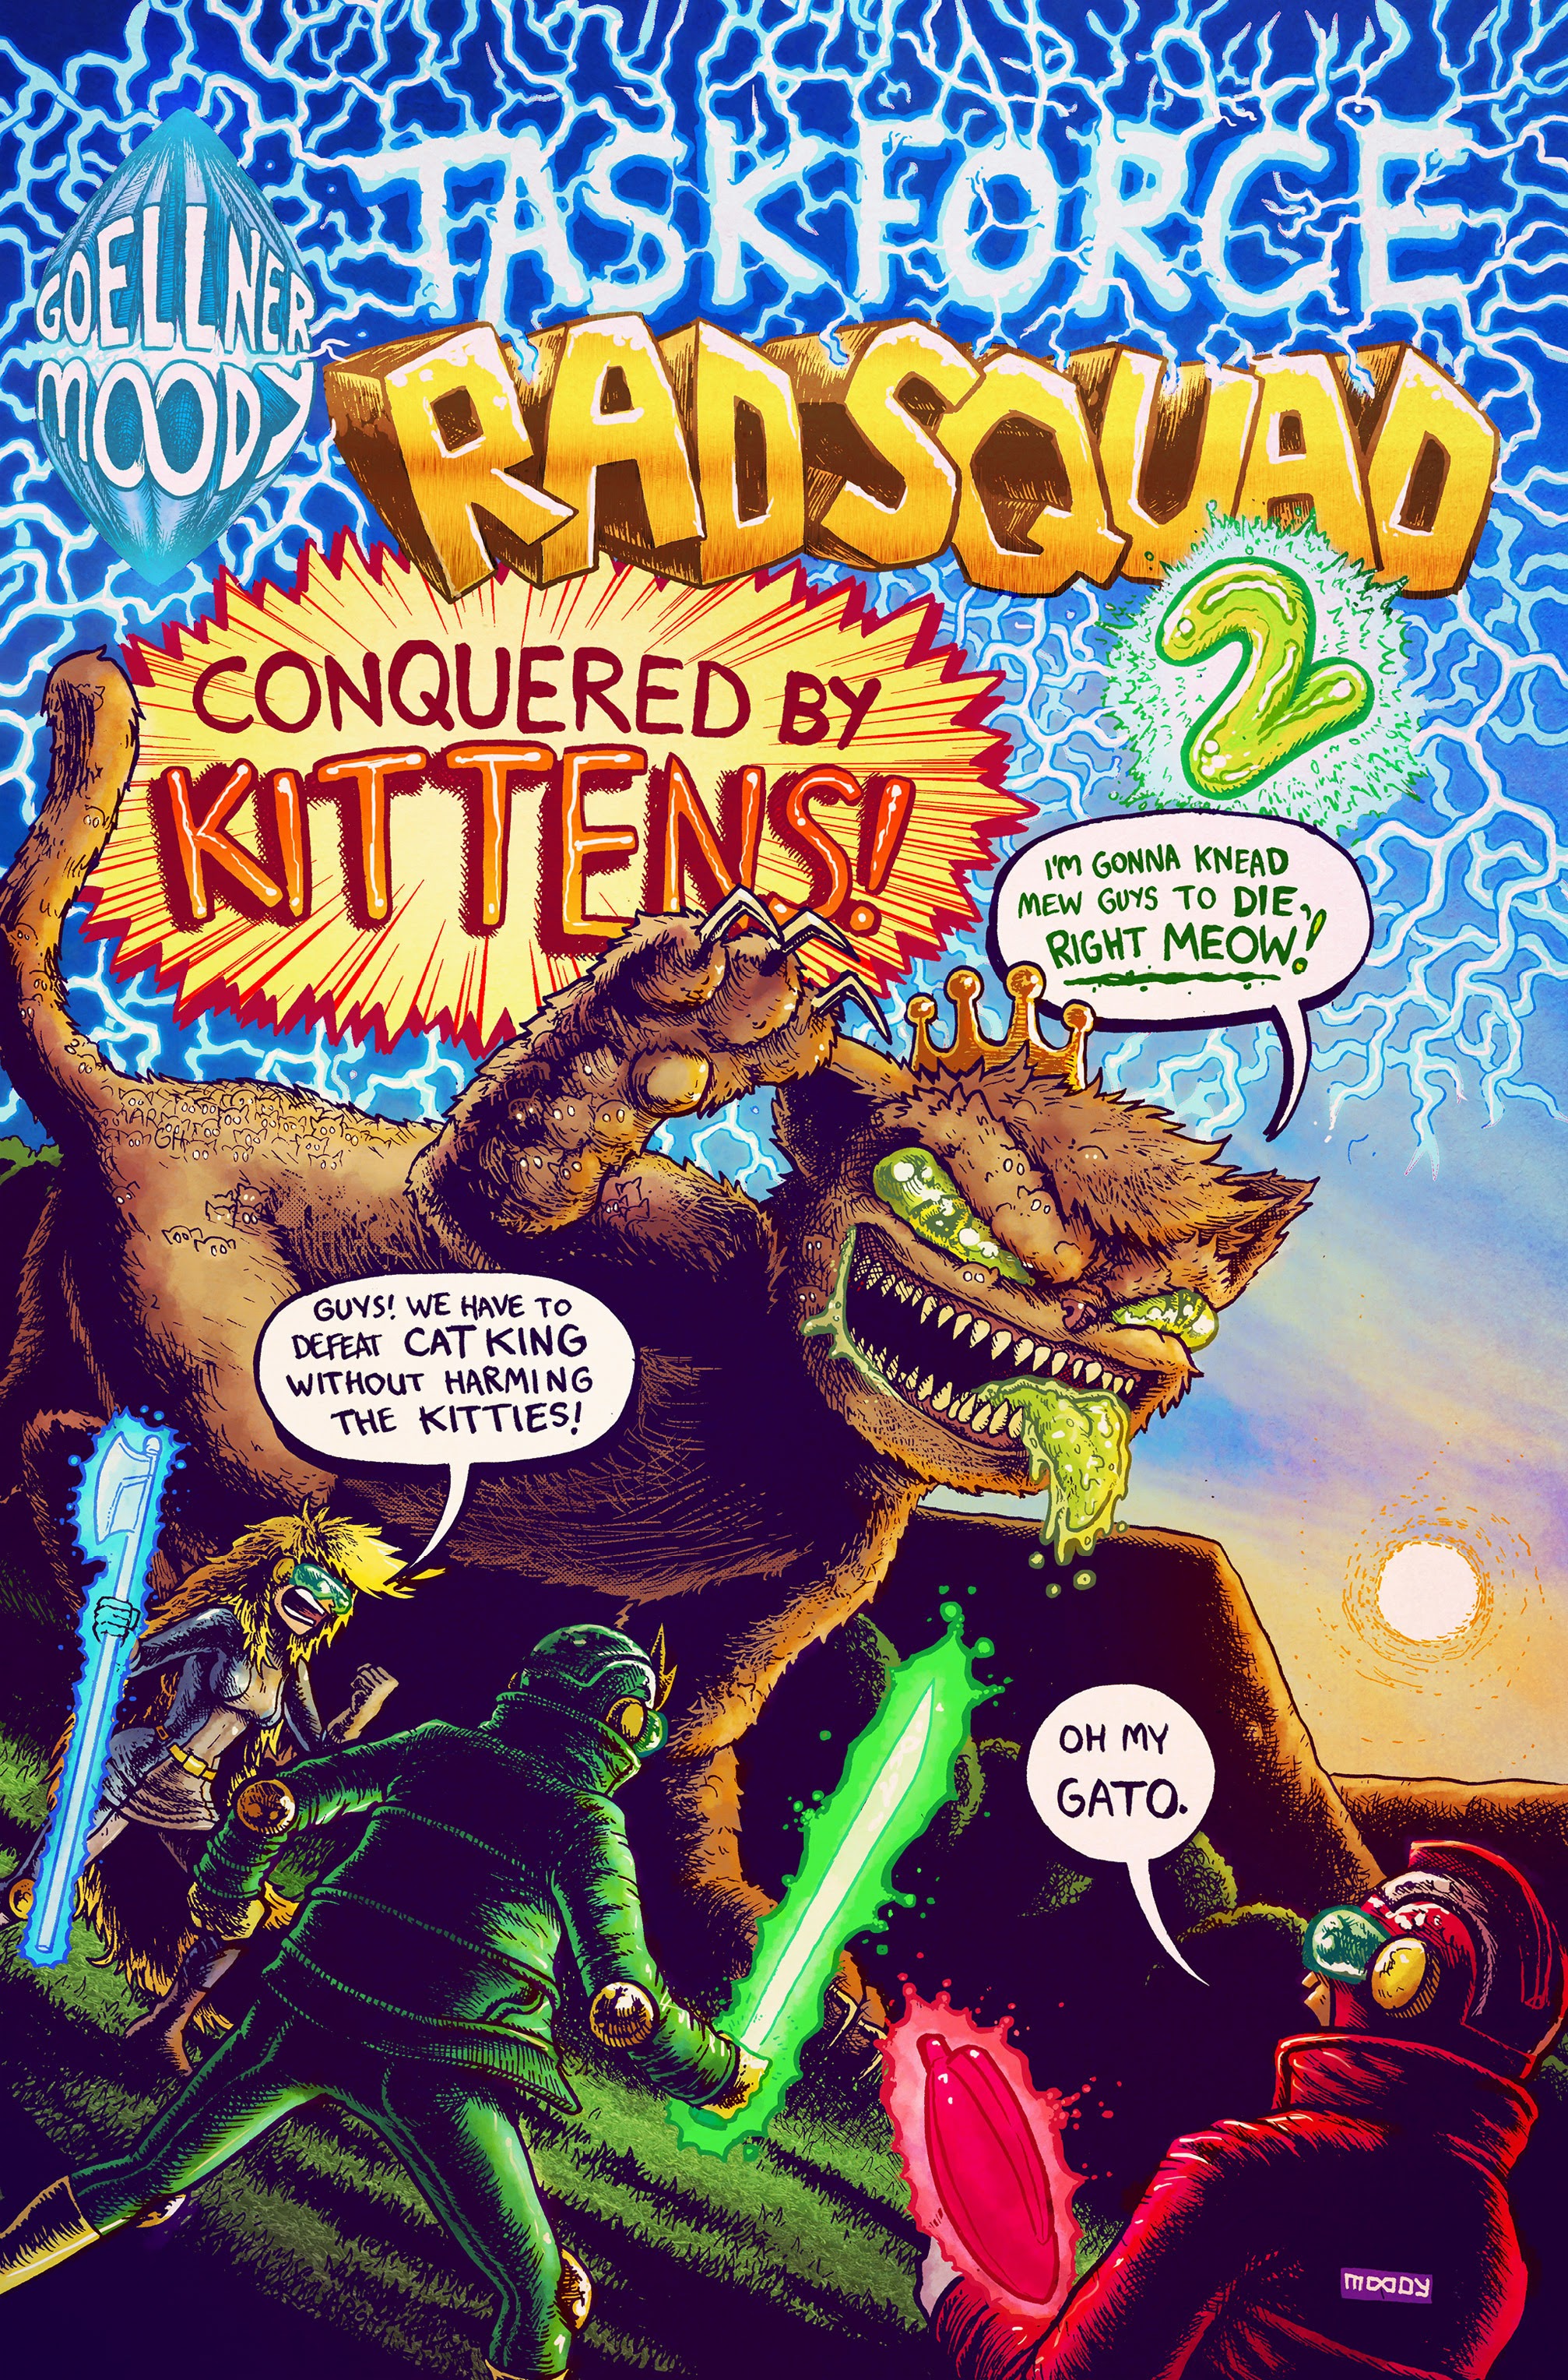 Read online Task Force Rad Squad comic -  Issue #2 - 1